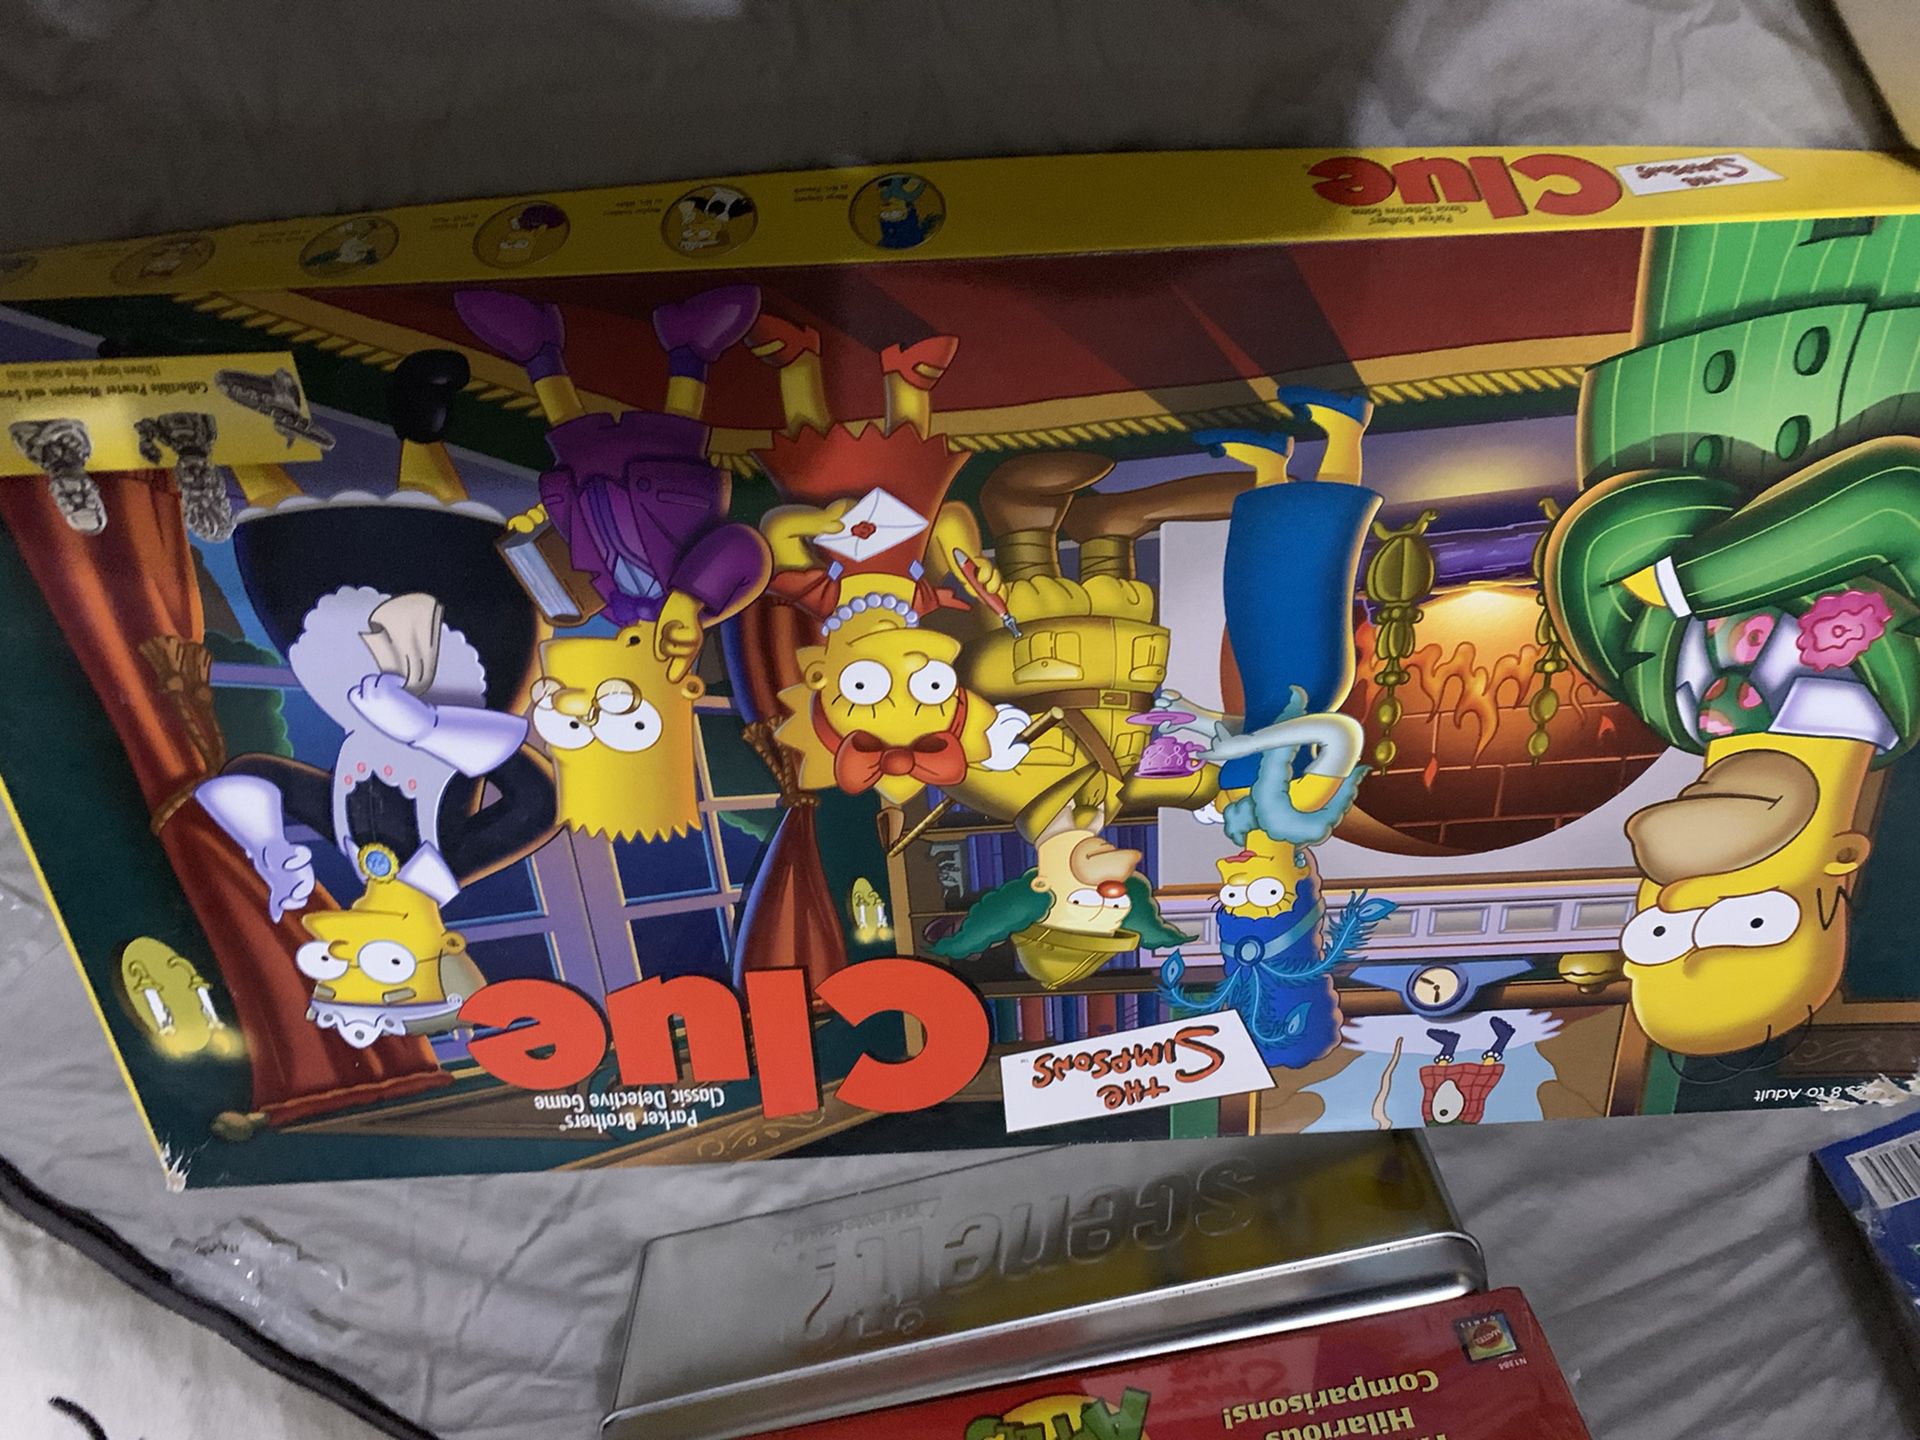 Simpsons”Clue” Board game